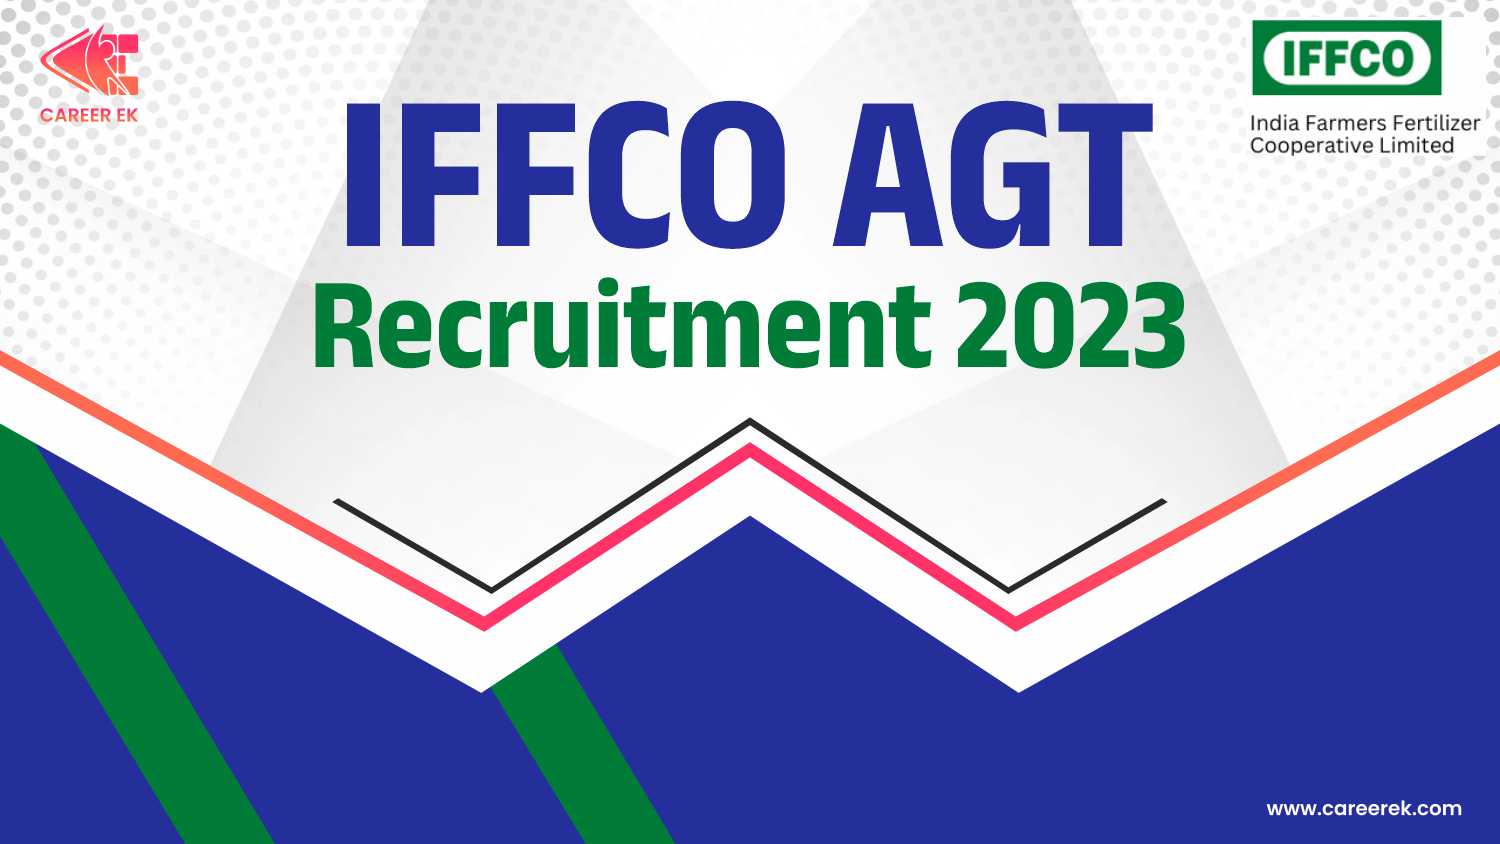 IFFCO AGT Recruitment 2023 Notification OUT Now Apply Online Link